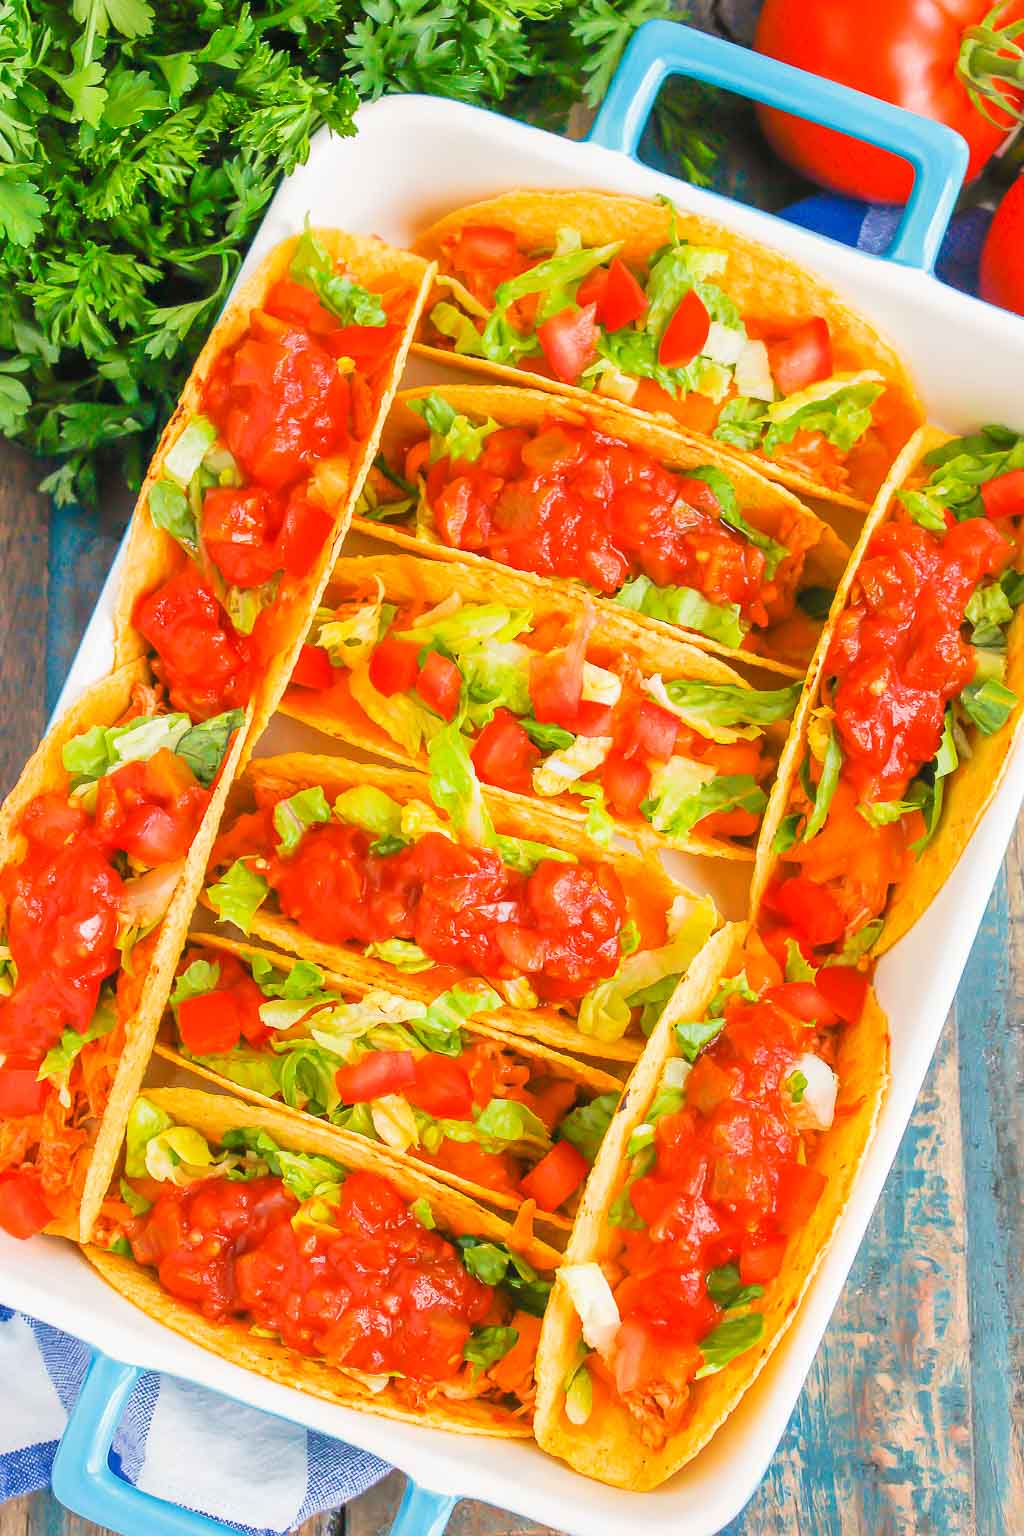 Baked Chicken Tacos are fast, easy, and perfect for a weeknight meal. With fresh ingredients and hardly any prep time, these tacos are perfect for when you want a no-fuss, flavorful dinner! #tacos #chickentacos #bakedtacos #chickendinner #chickenrecipes #easydinner #weeknightmeal